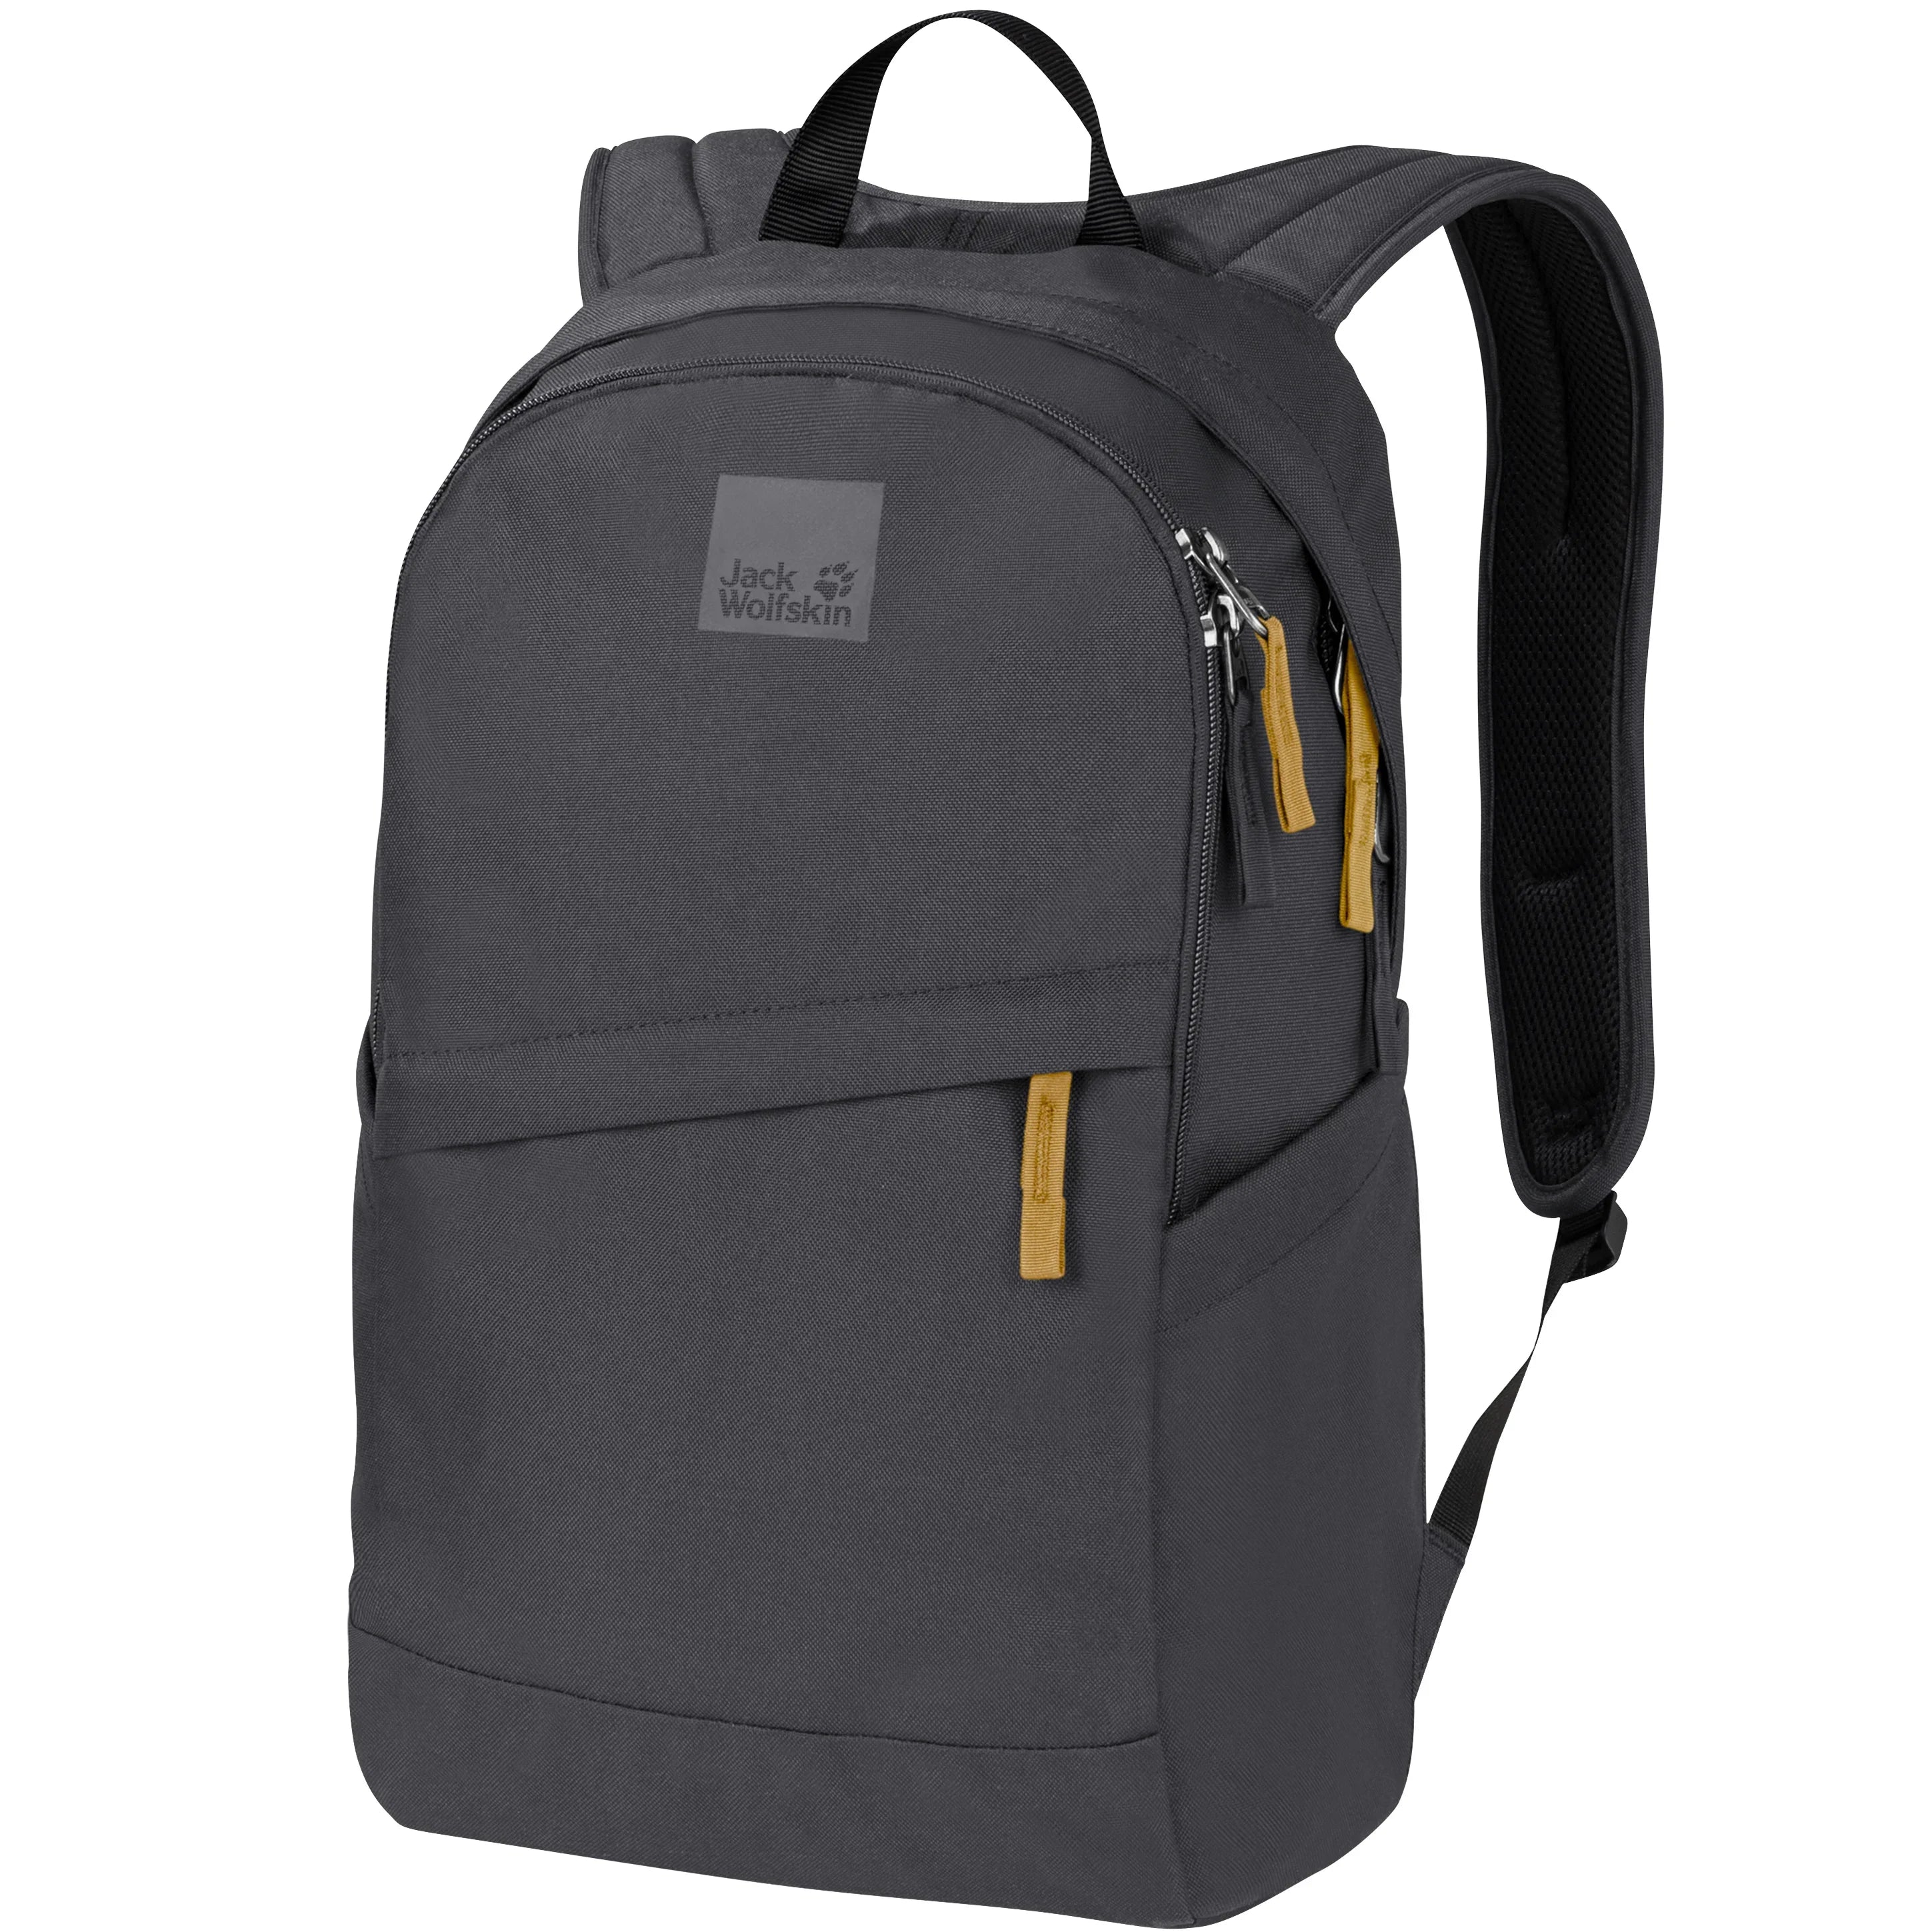 Jack Wolfskin daypacks life companions perfect for - & travel bags and everyday